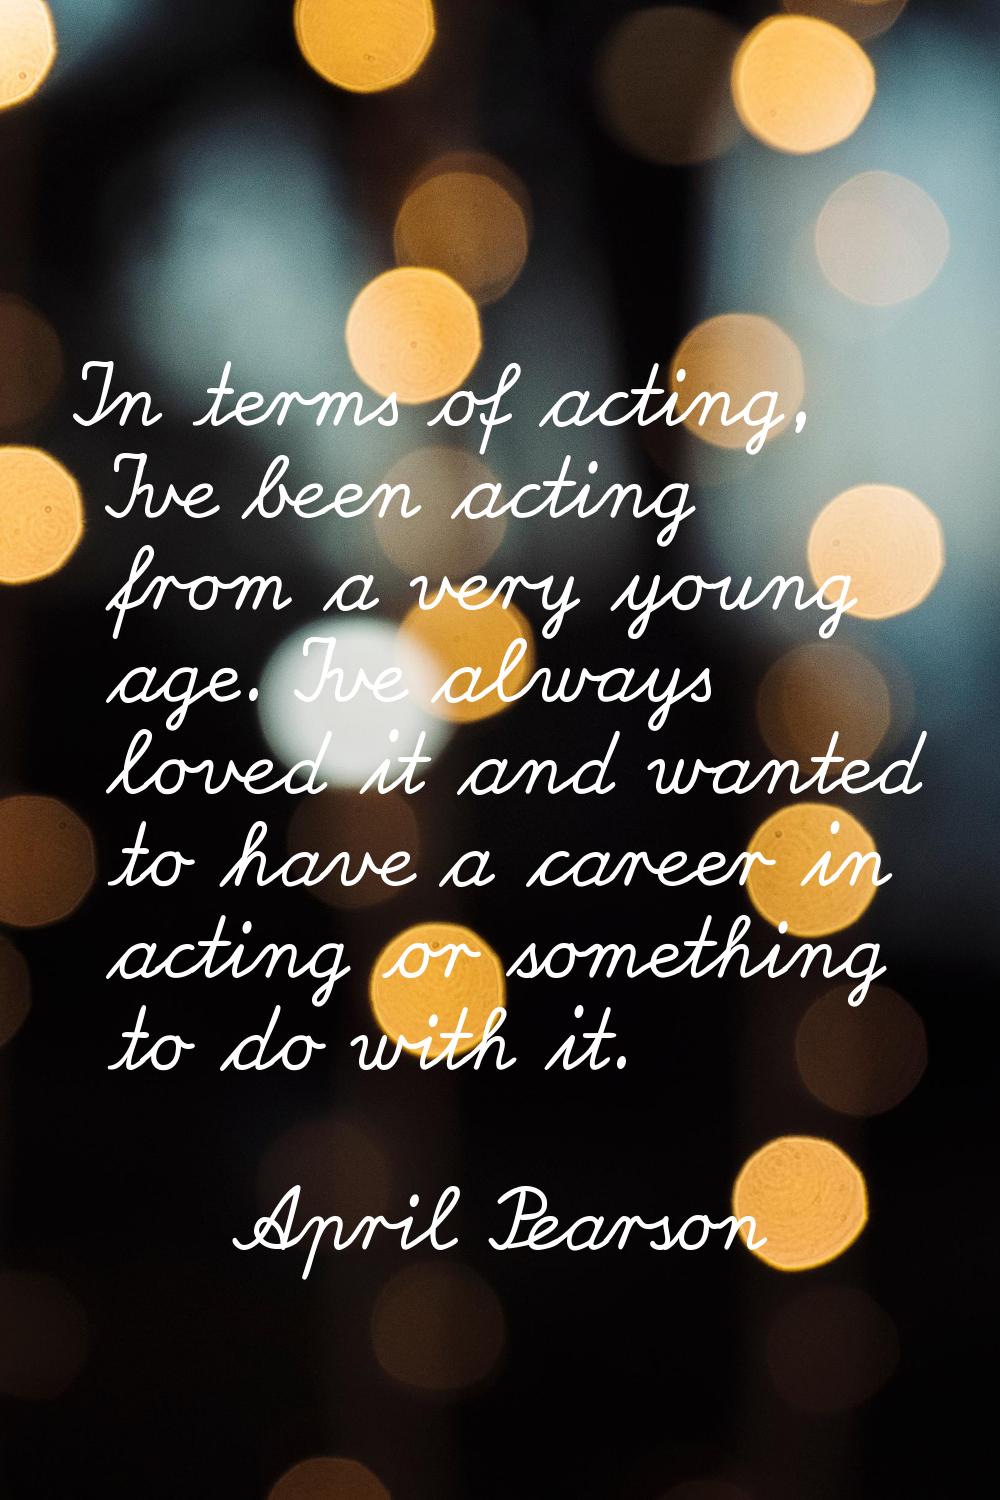 In terms of acting, I've been acting from a very young age. I've always loved it and wanted to have